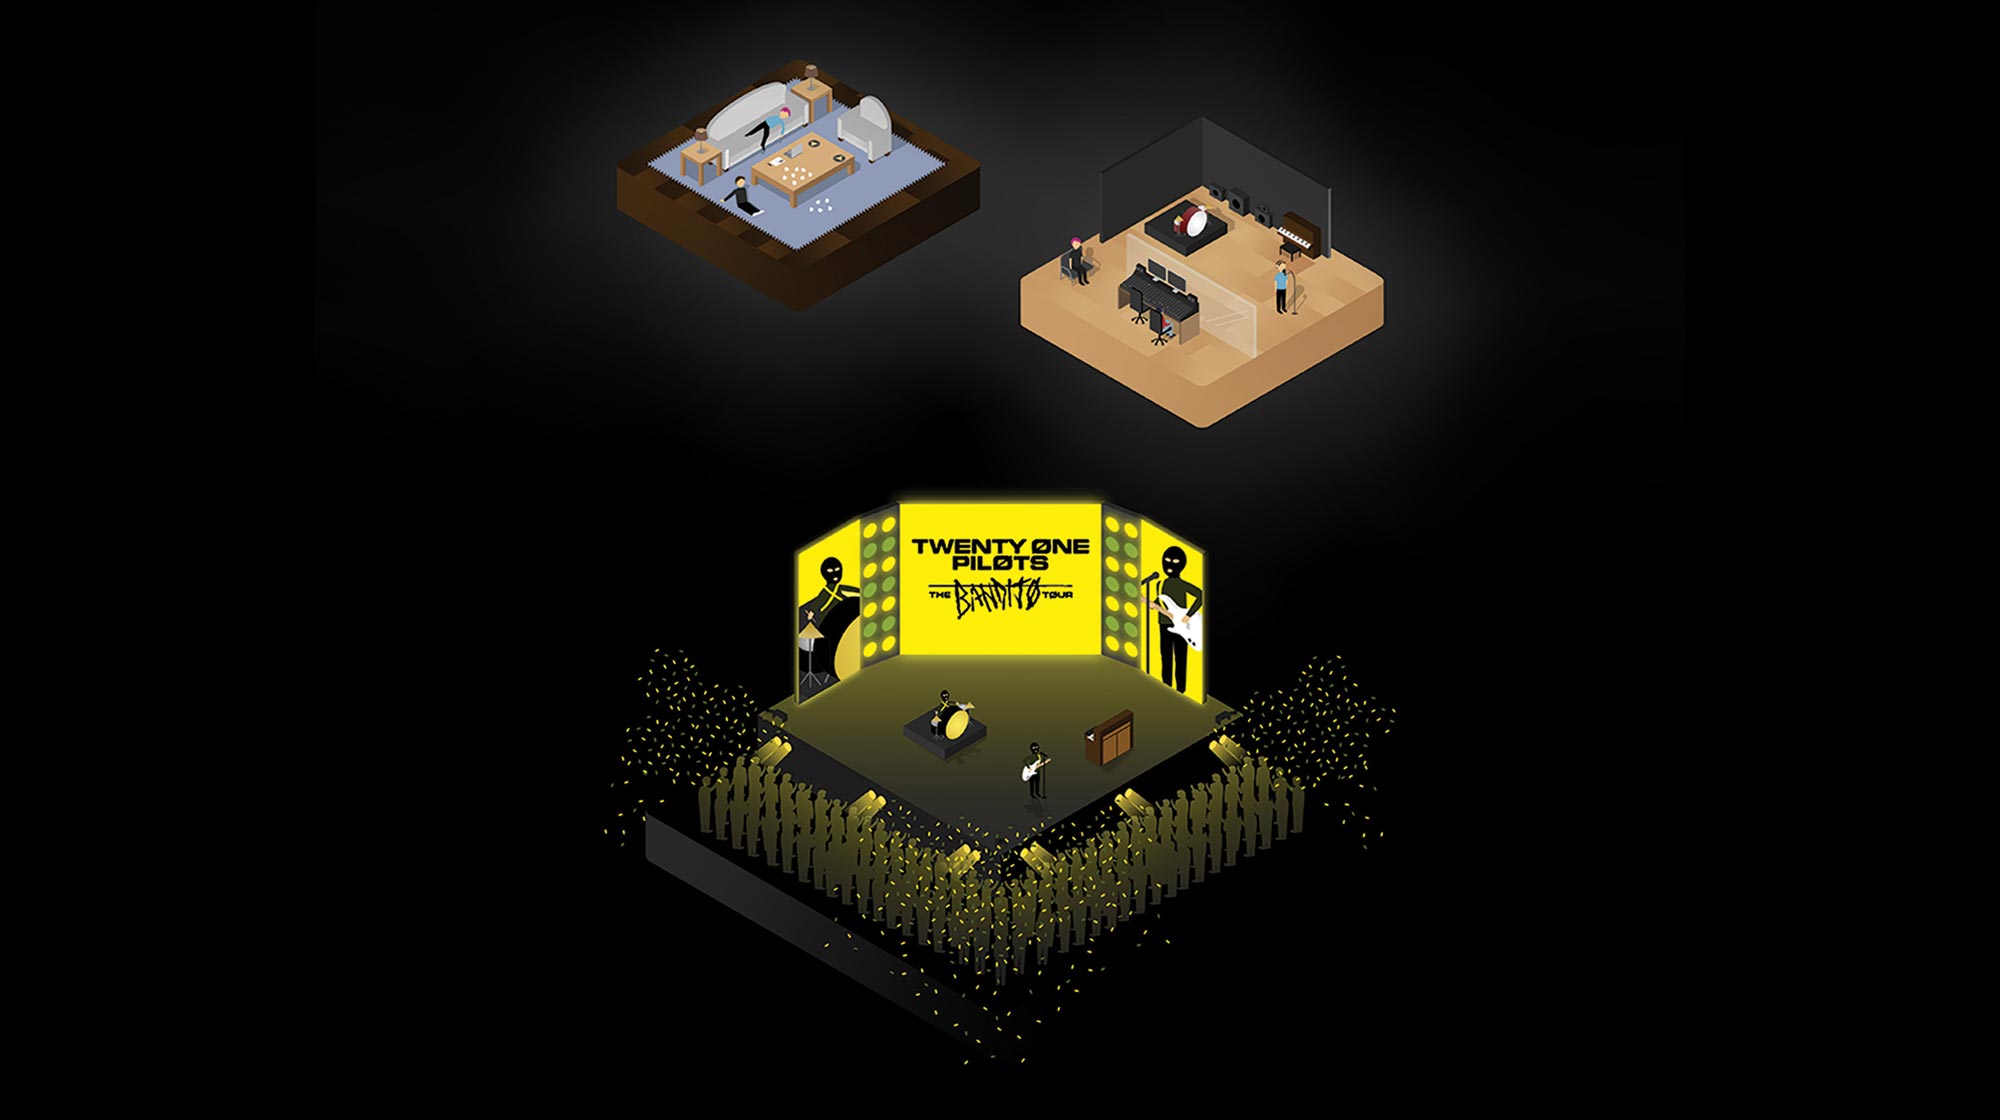 This is an image of the final isometric illustration